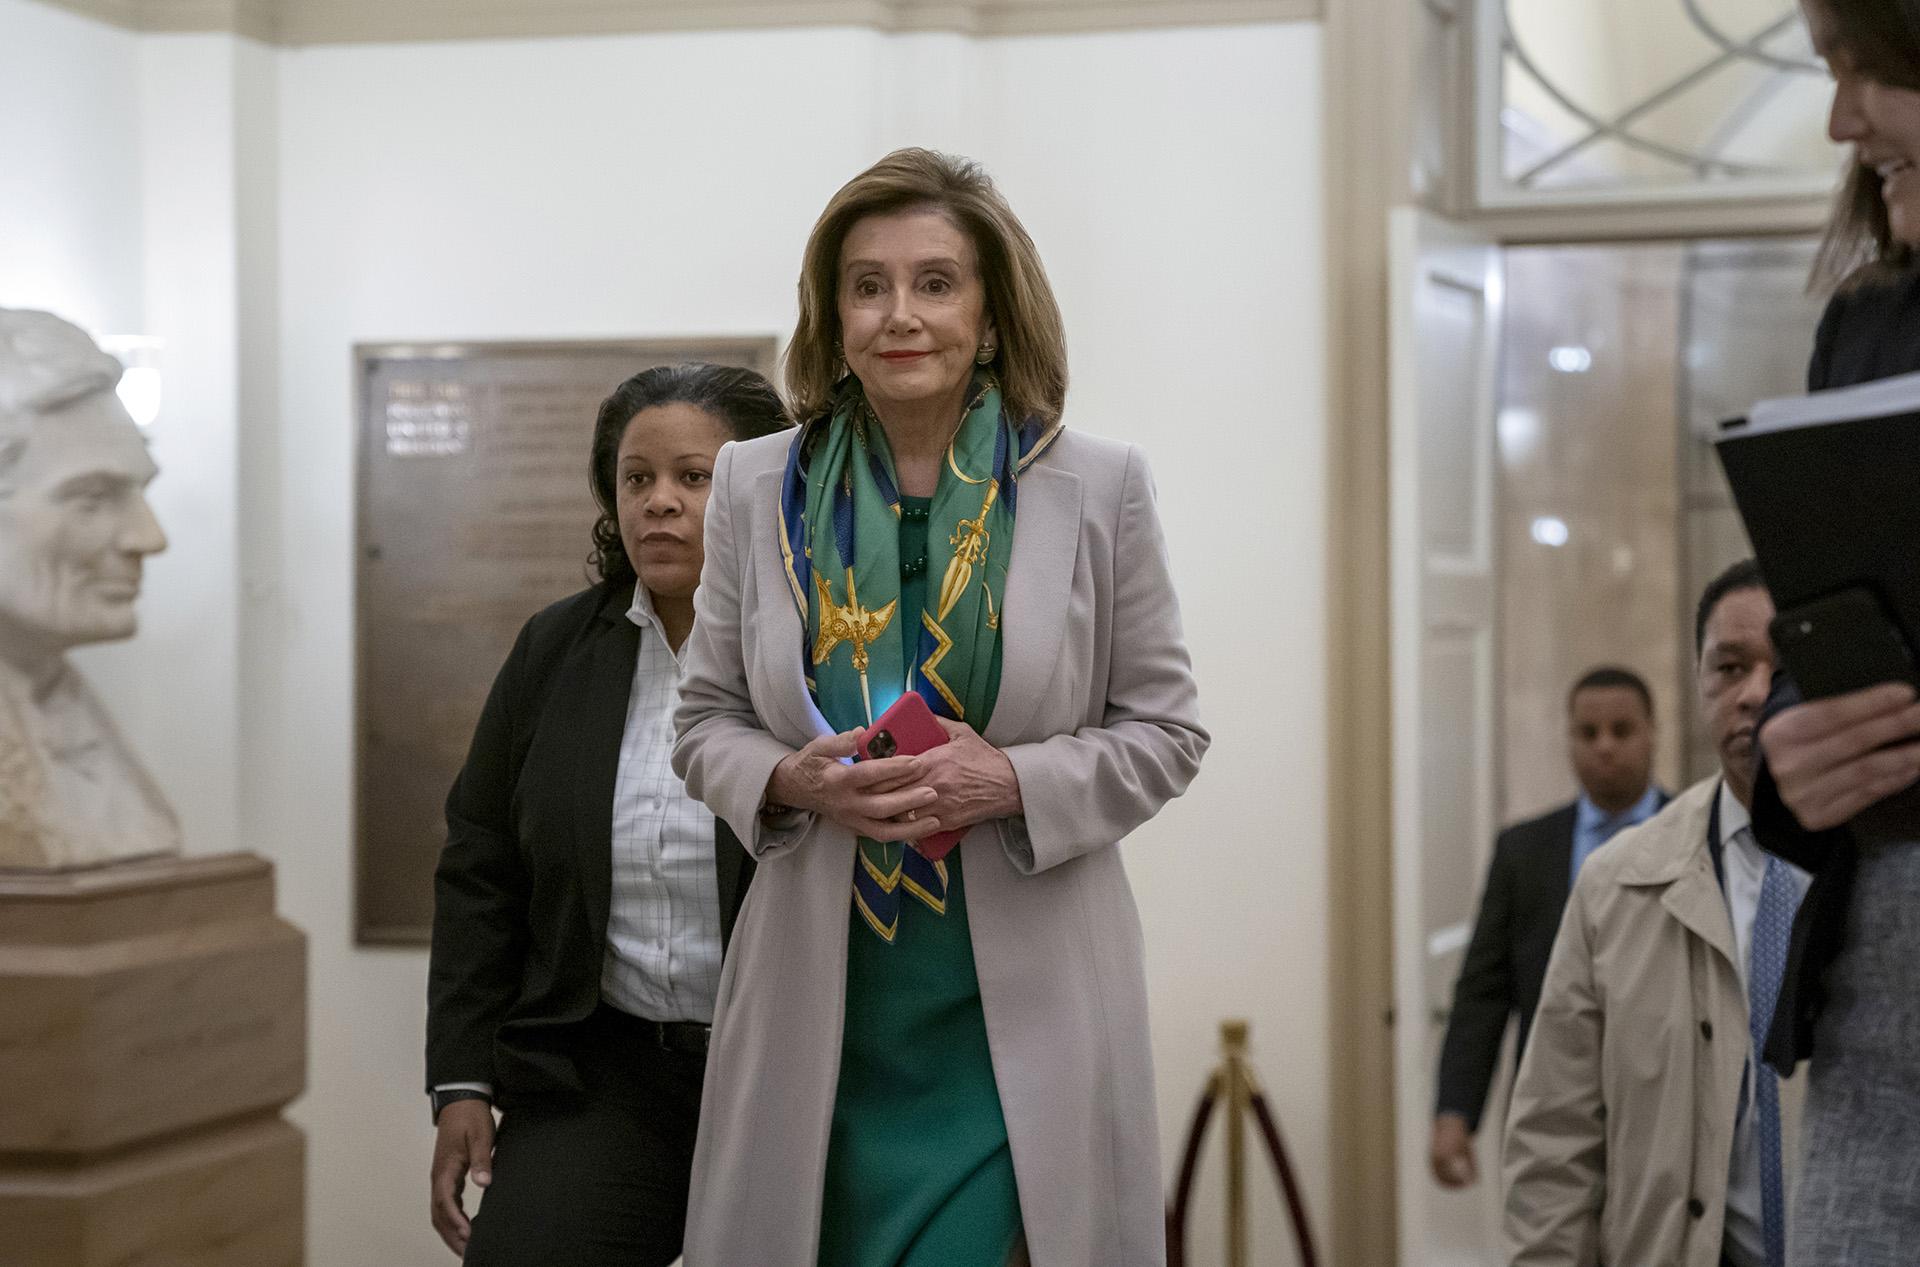 Speaker of the House Nancy Pelosi, D-Calif., arrives to meet with the Democratic Caucus at the Capitol in Washington, Tuesday, Jan. 14, 2020. (AP Photo / J. Scott Applewhite)